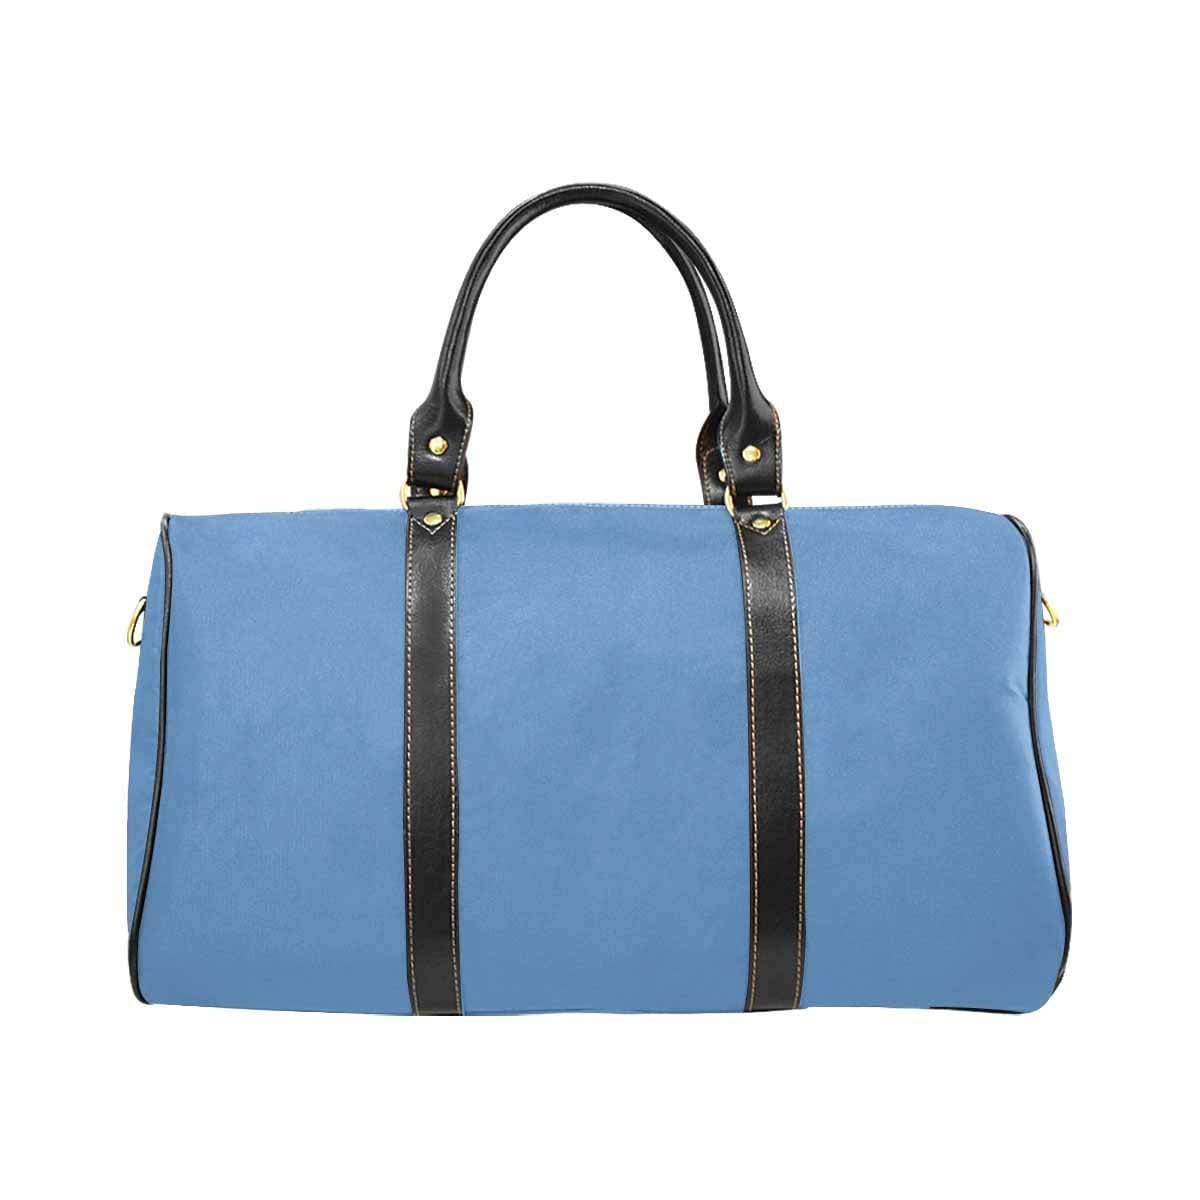 Travel Bag Leather Carry On Large Luggage Bag Blue Gray - Bags | Travel Bags |